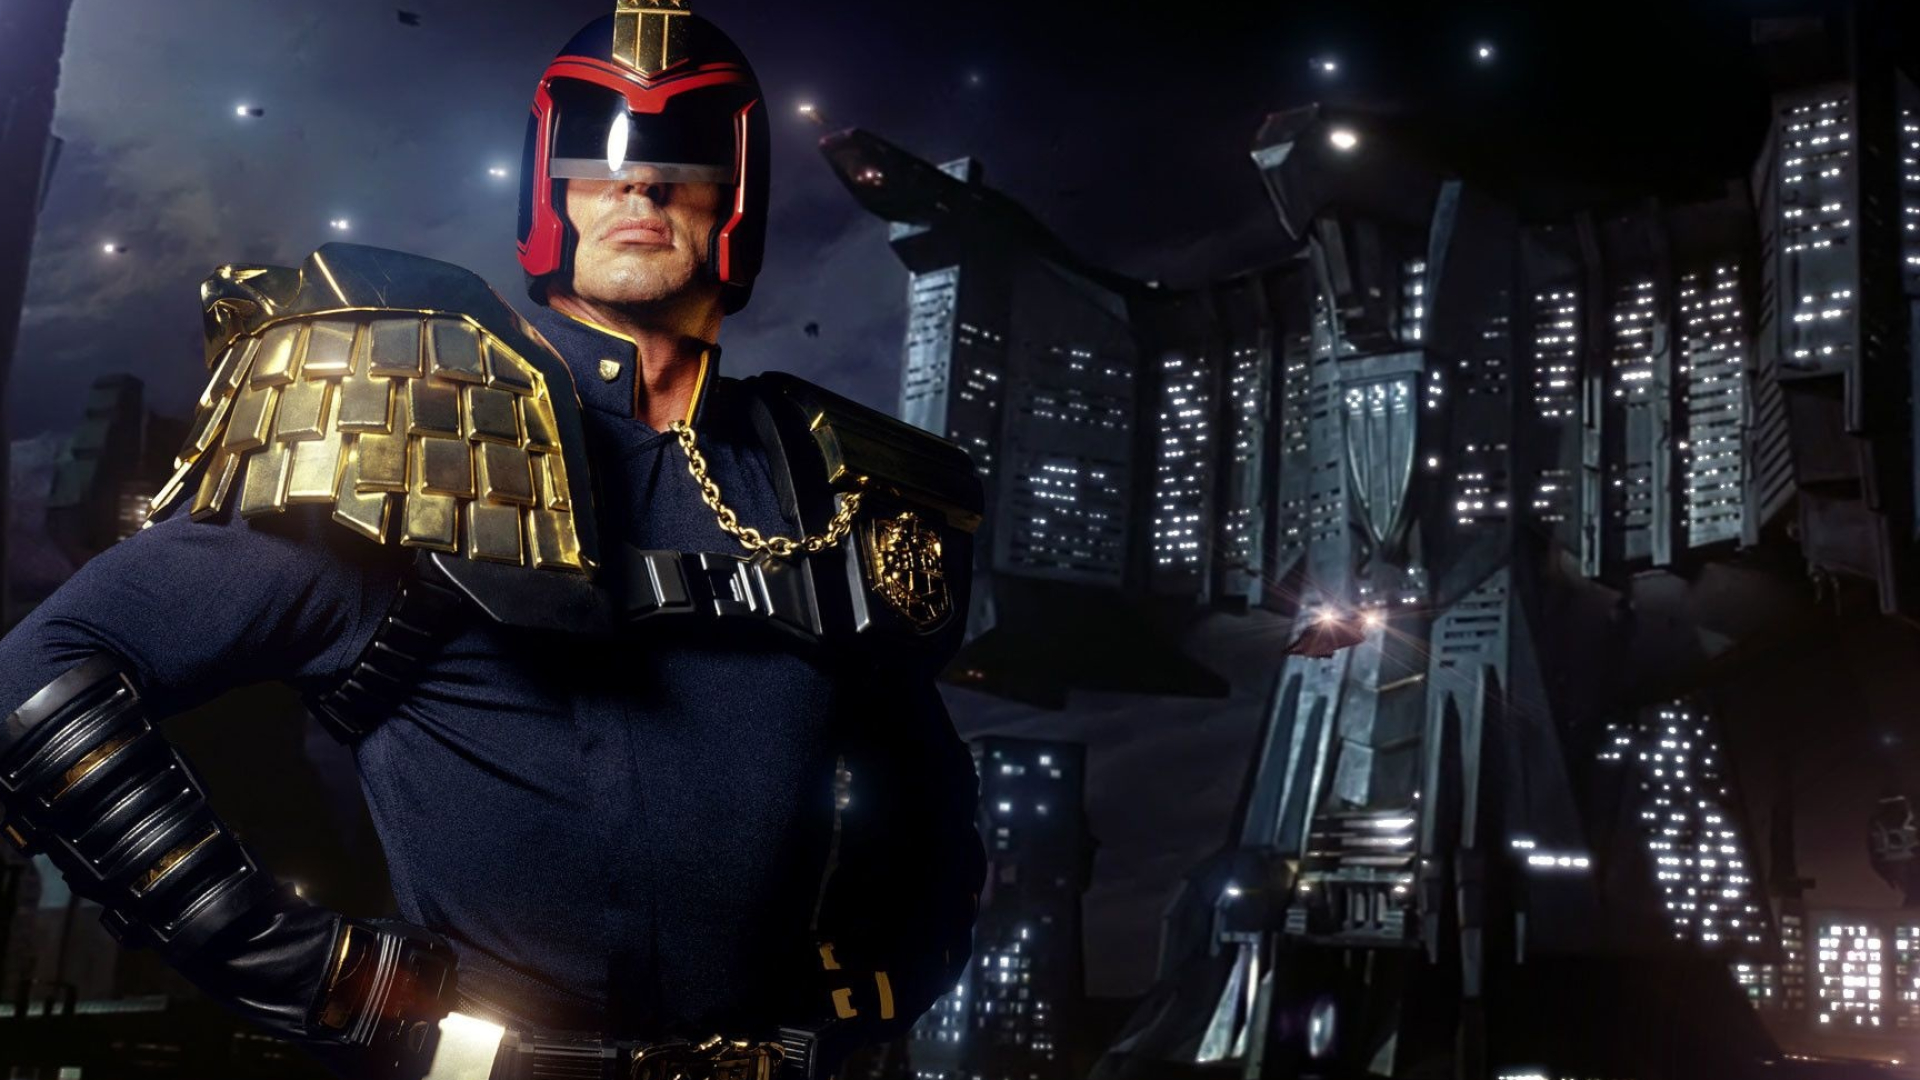 Dredd: The character first introduced in the 1977 second issue of the comic 2000AD. 1920x1080 Full HD Wallpaper.